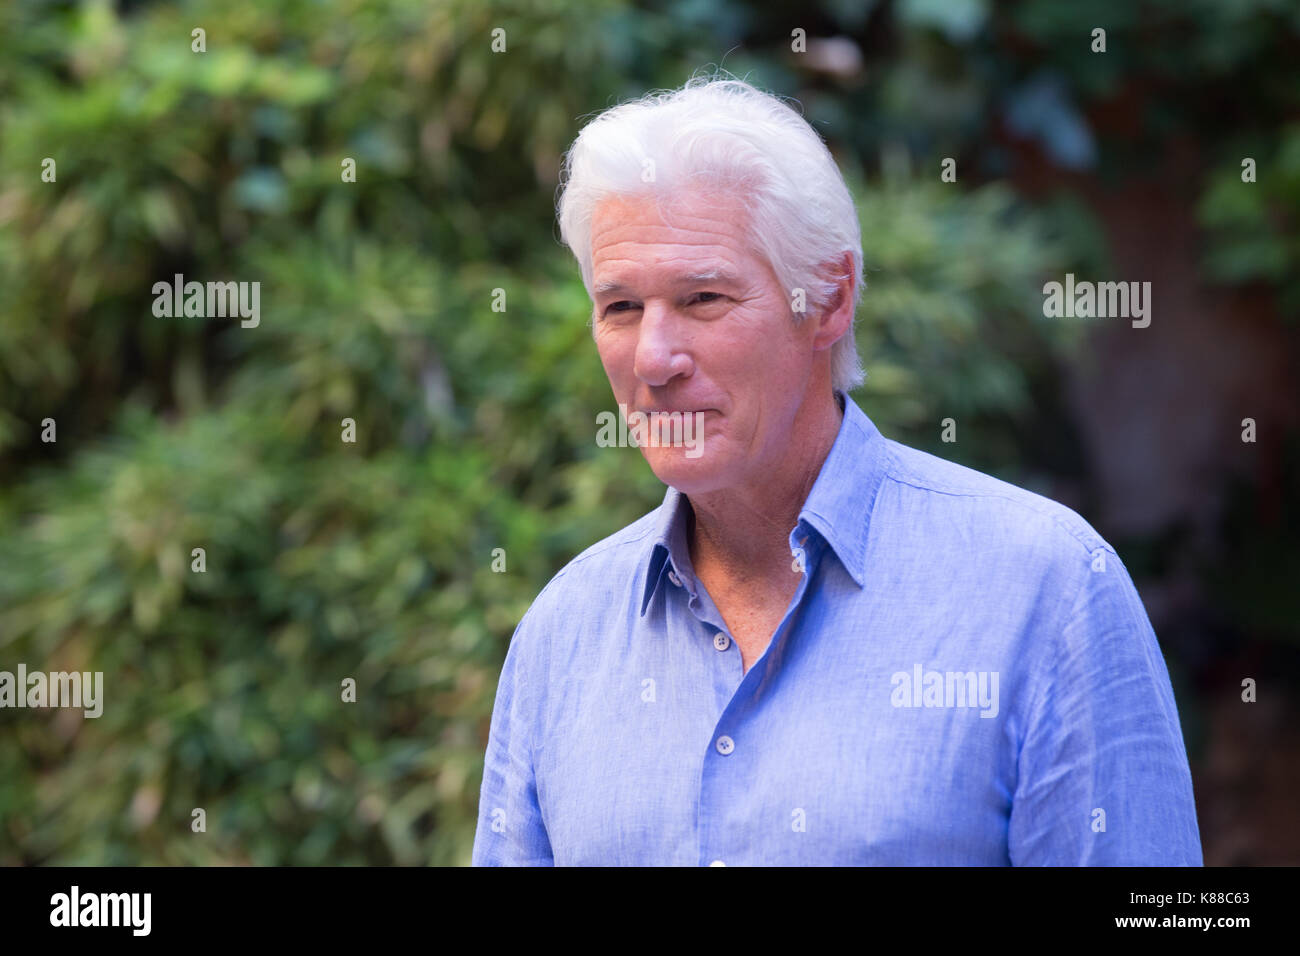 Roma, Italy. 18th Sep, 2017. Photocall with US actor Richard Gere in Rome for his new film 'Norman: The Moderate Rise and Tragic Fall of a New York Fixer' (in Italian: 'L'incredibile vita di Norman'). Credit: Matteo Nardone/Pacific Press/Alamy Live News Stock Photo